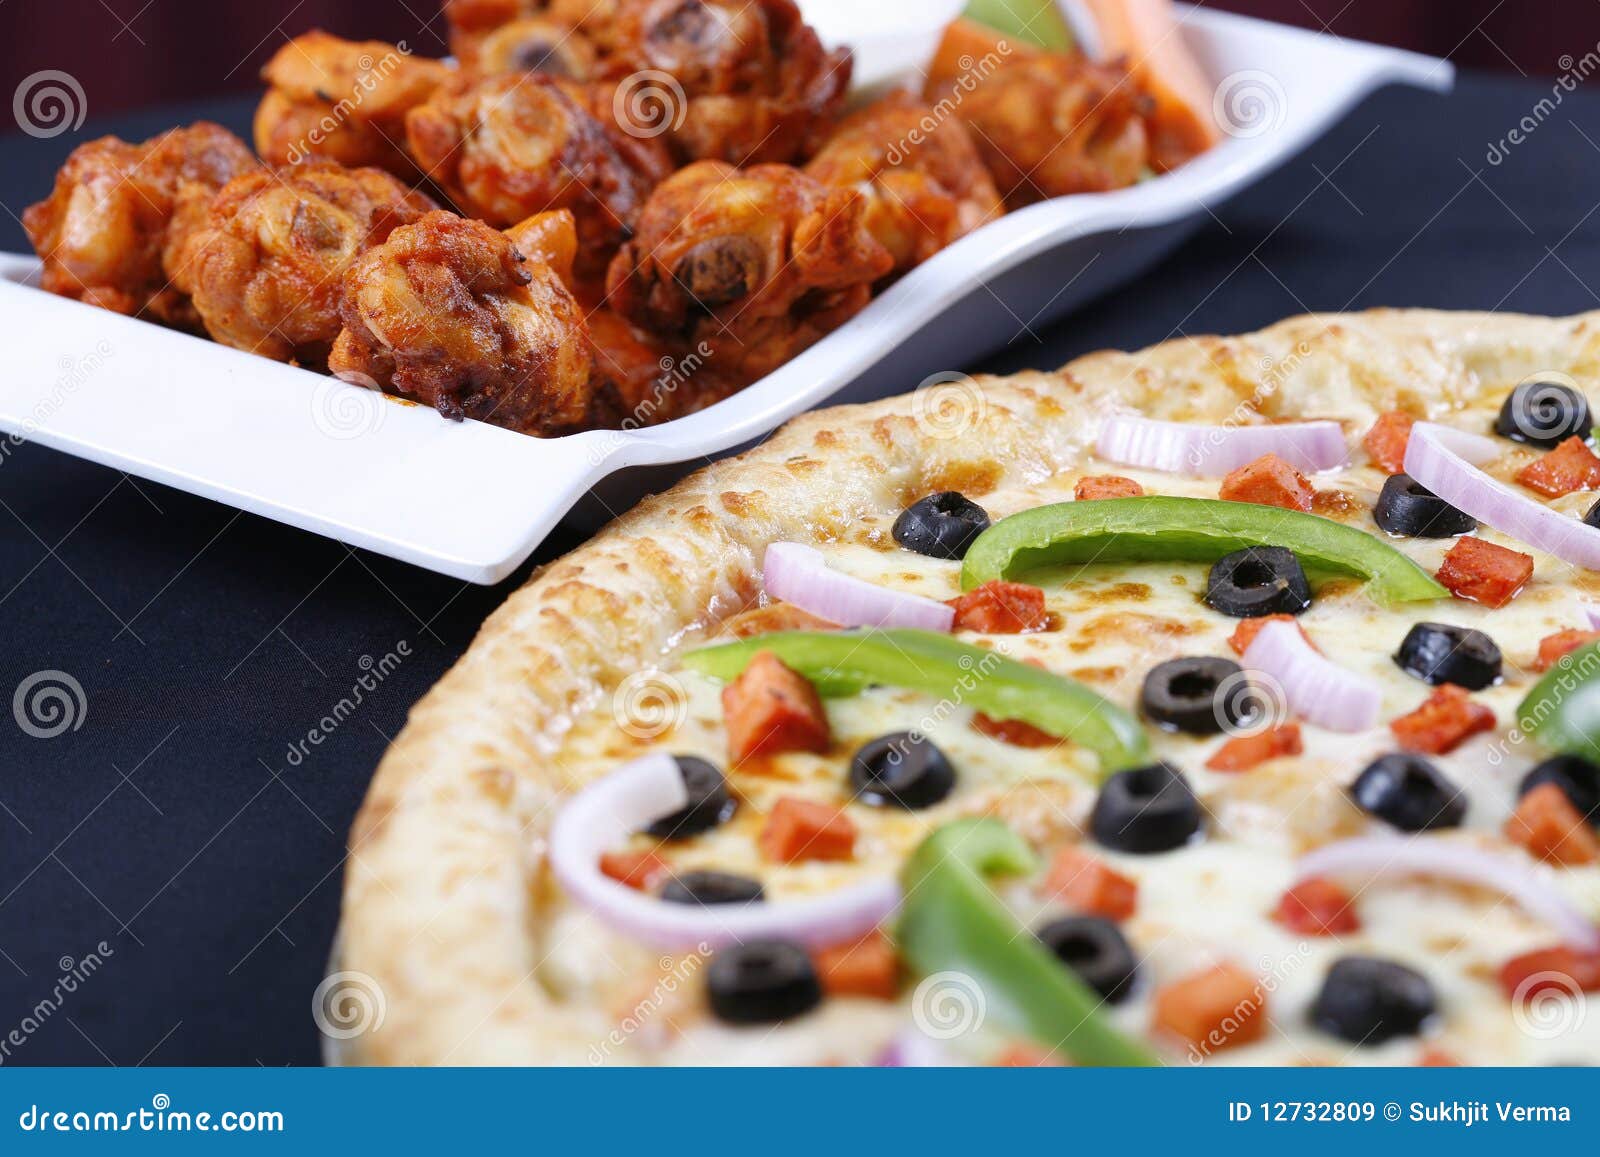 Pizza and wings stock image. Image of meal, cheese, dinner - 12732809